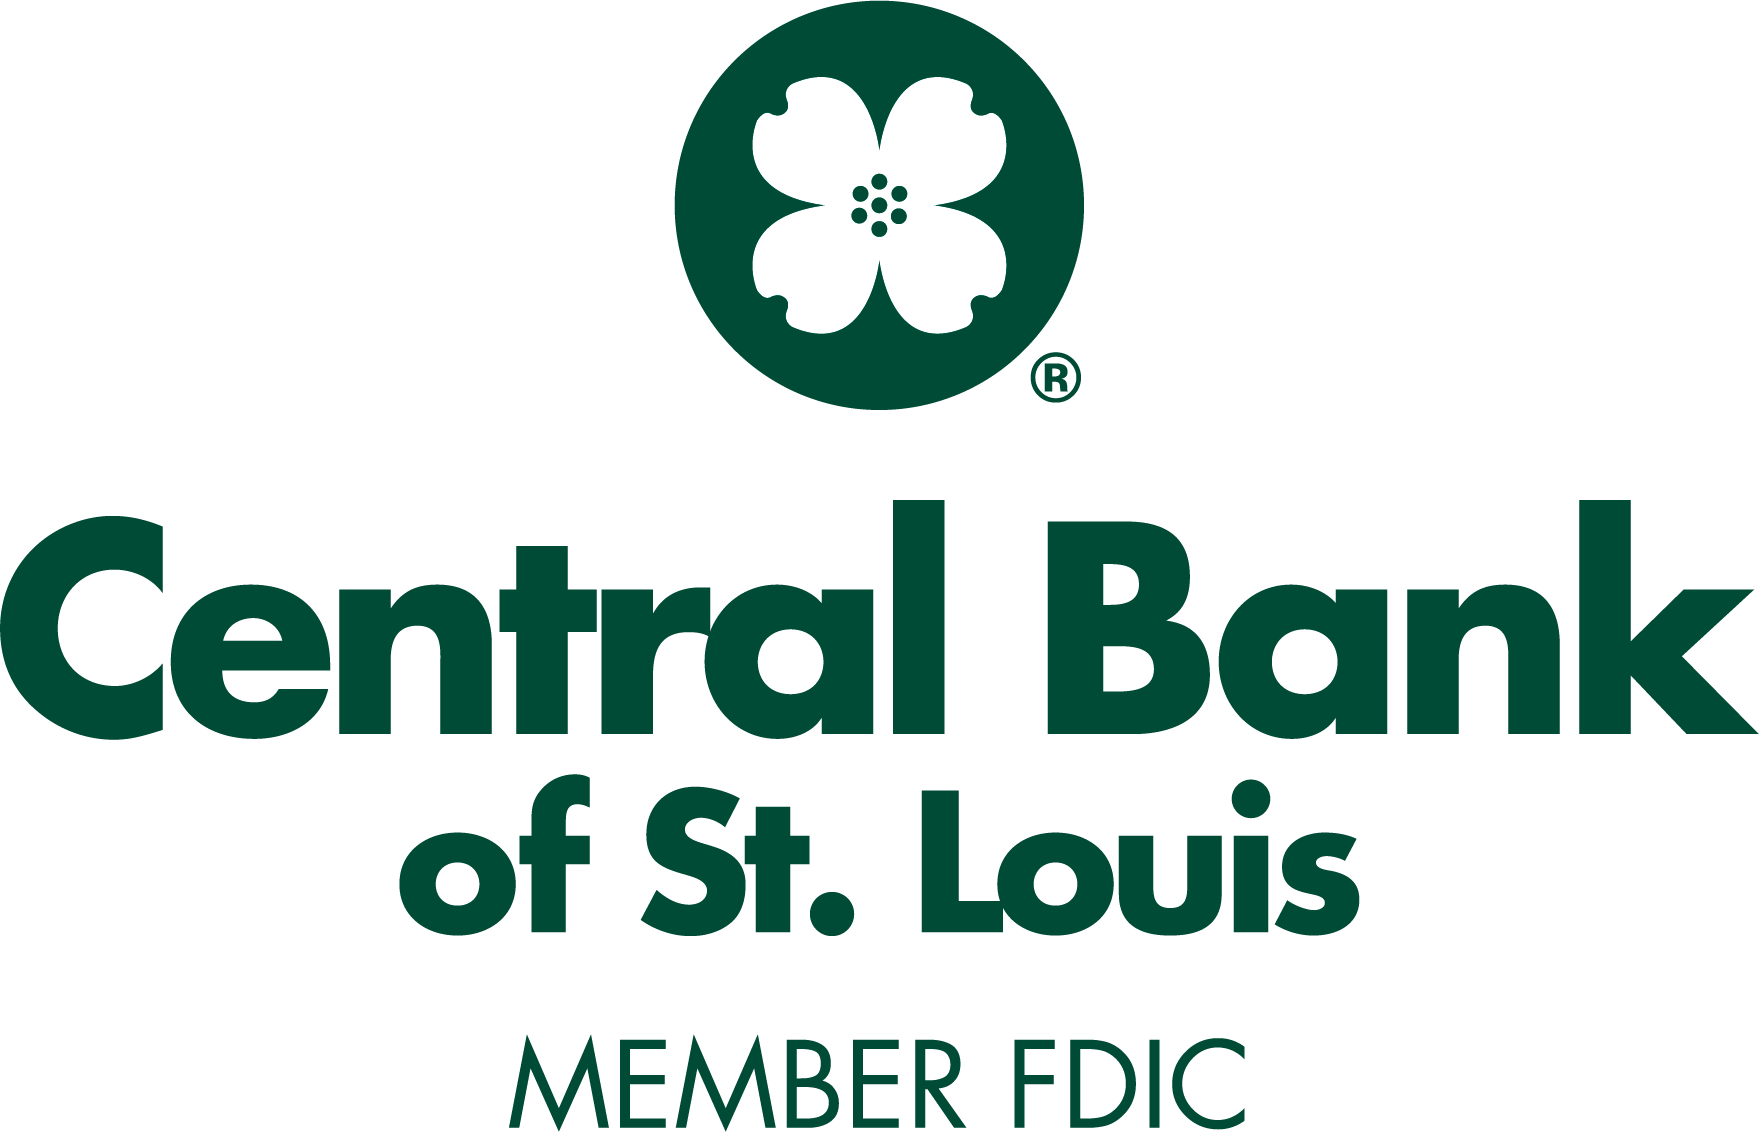 Central Bank of St. Louis